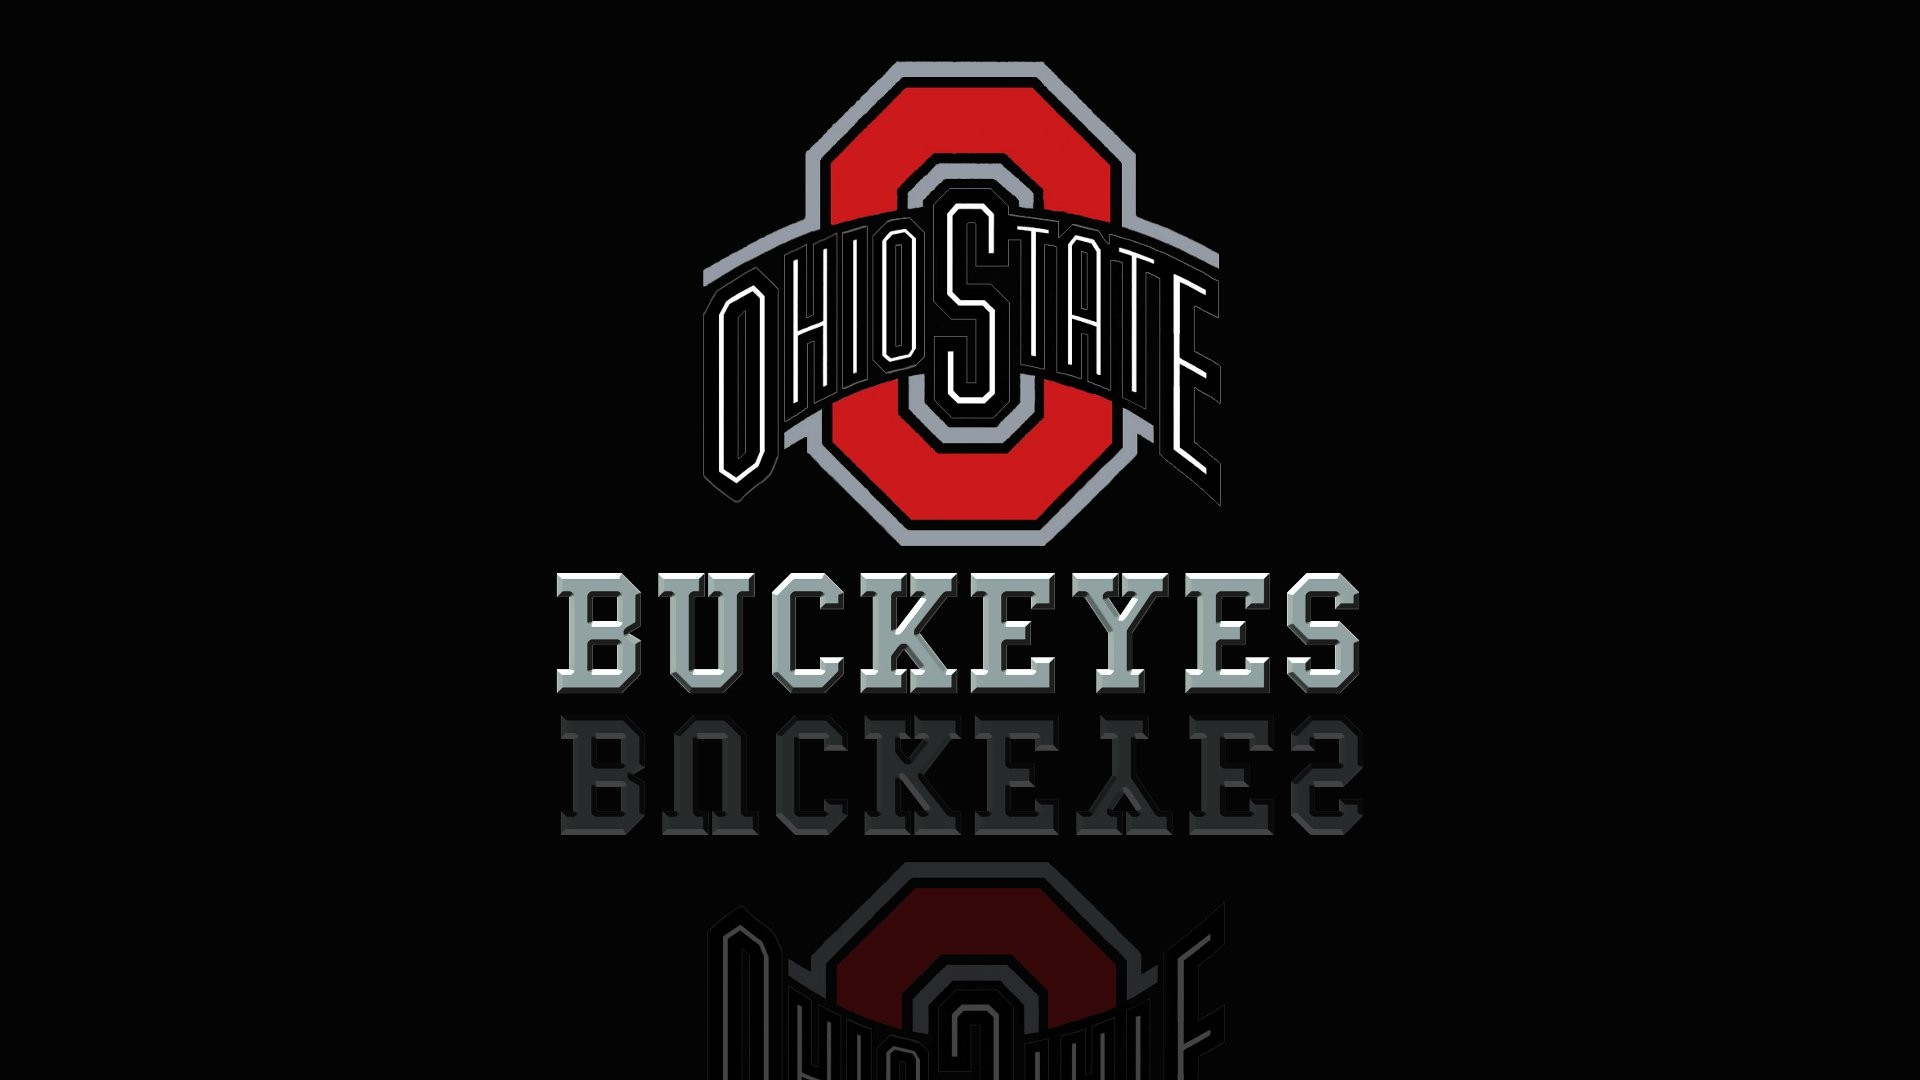 1920x1080 Ohio State Football images OSU Wallpaper 150 HD wallpaper and .